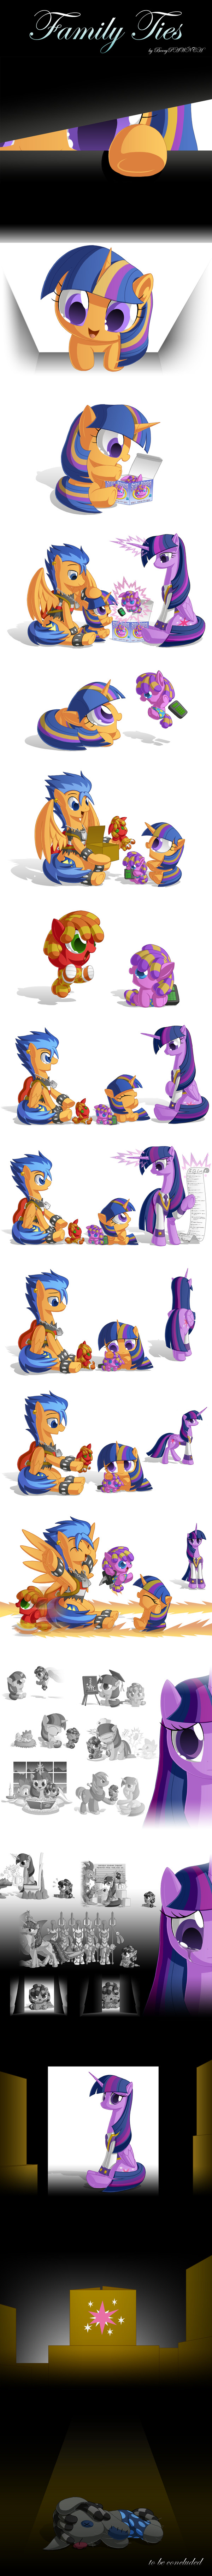 Family Ties. My Little Pony, Twilight Sparkle, Flash Sentry, Smarty pants, , 